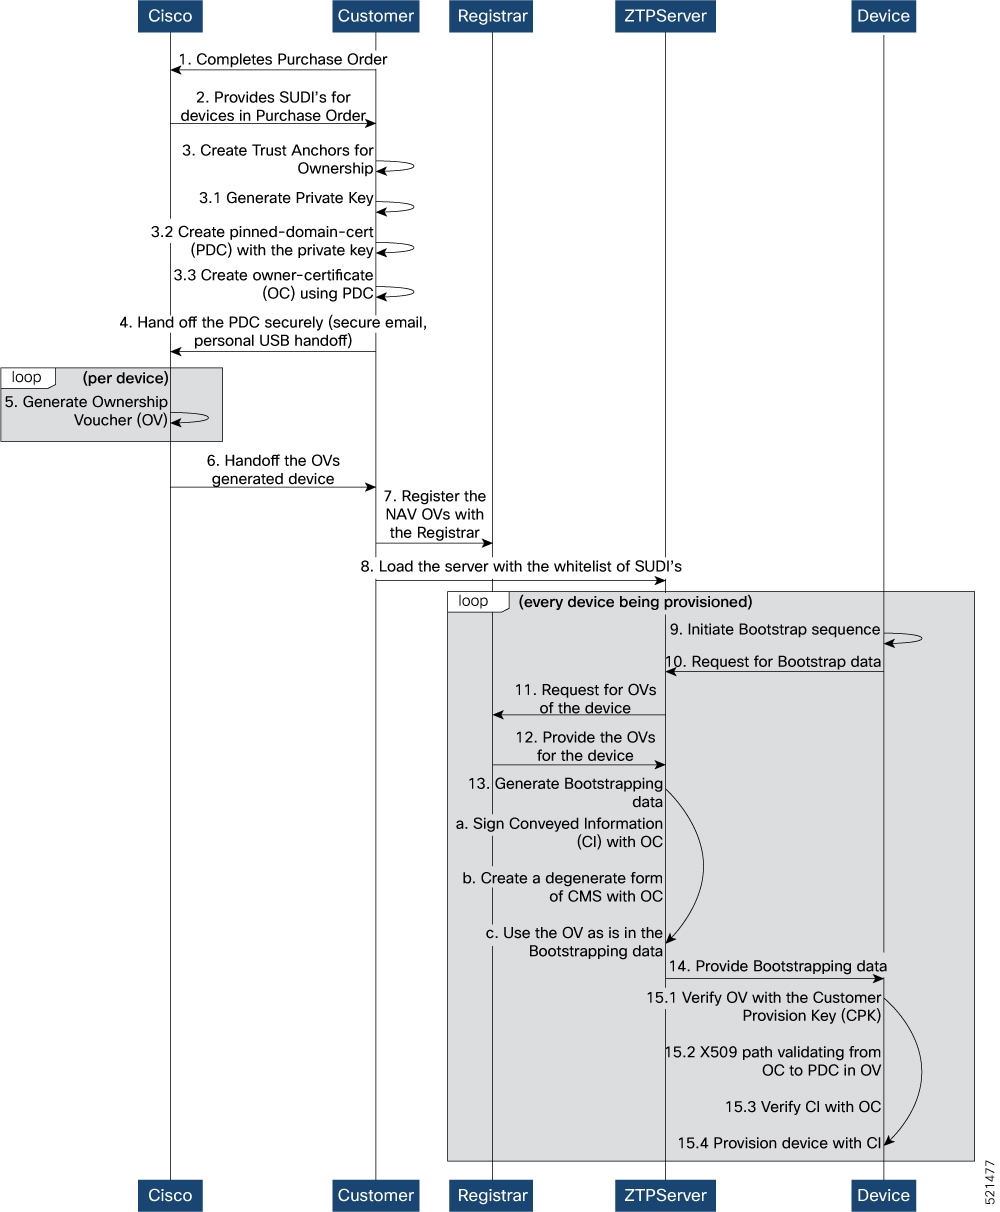 Sequence diagram representing the end-to-end tasks in provisioning a router using secure ZTP